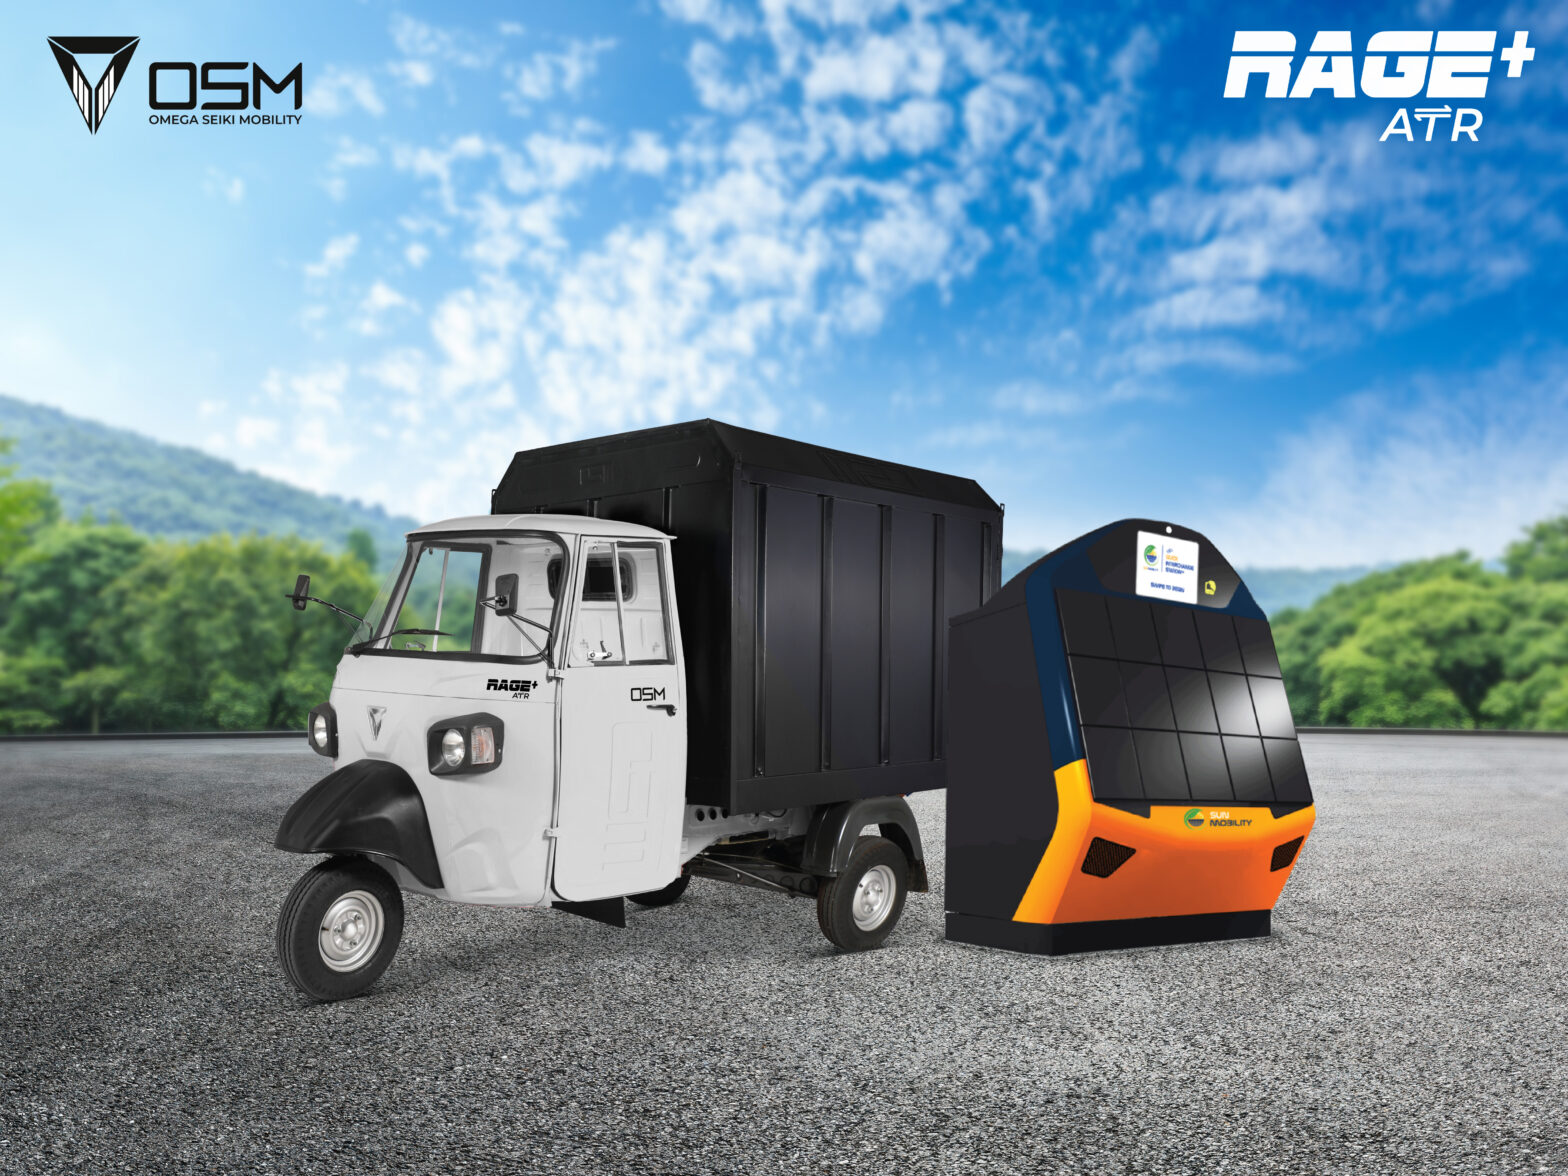 Rage+ ATR- Electric Three- wheeler with swappable battery.